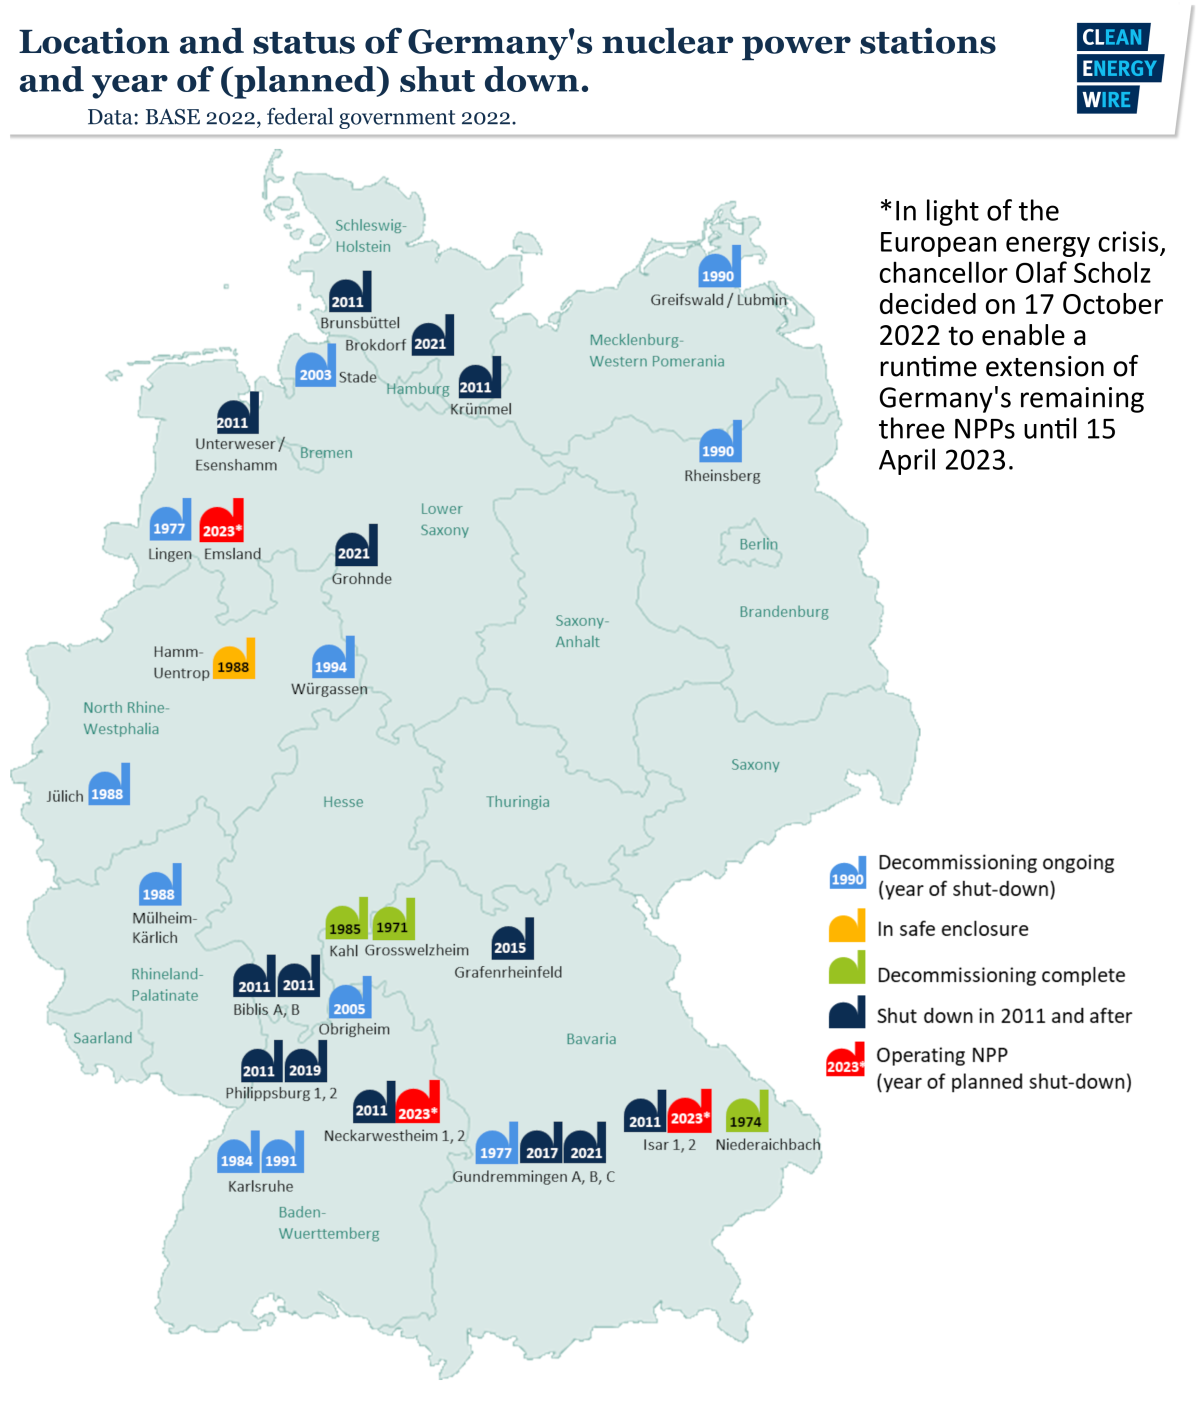 Map shows nuclear power plants in Germany with shutdown date. Source: CLEW.